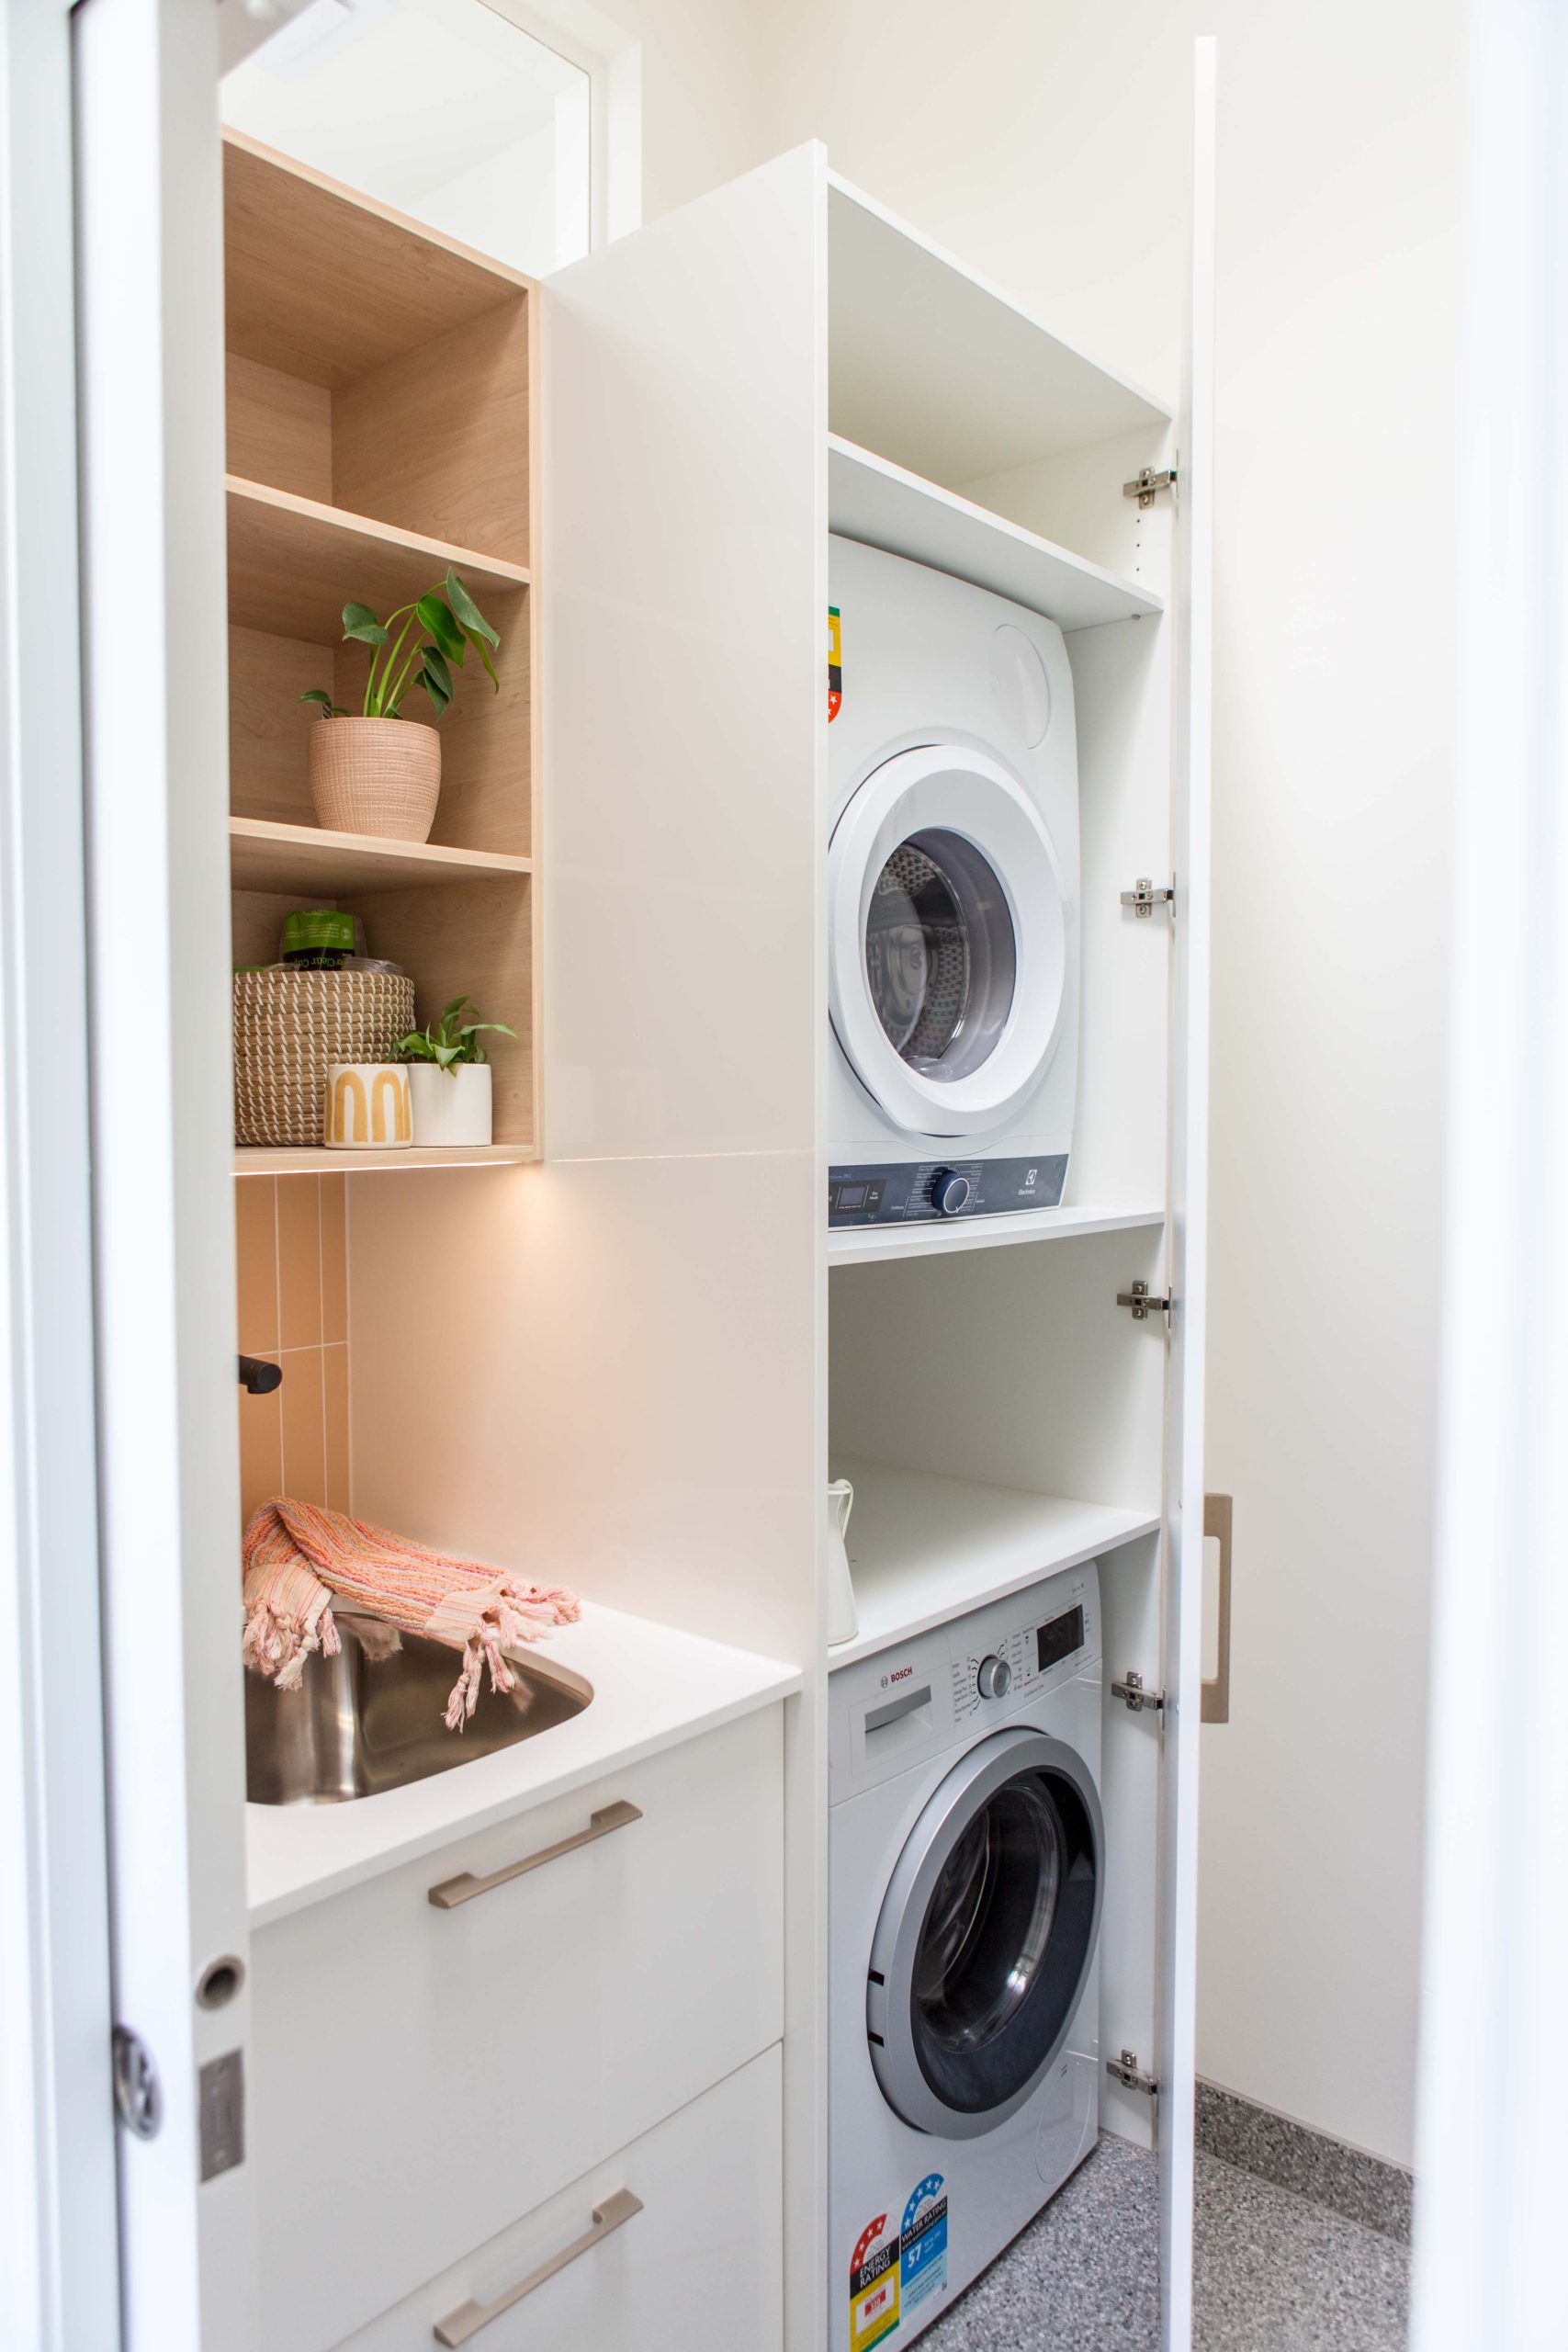 Laundry Renovations - The Inside Project